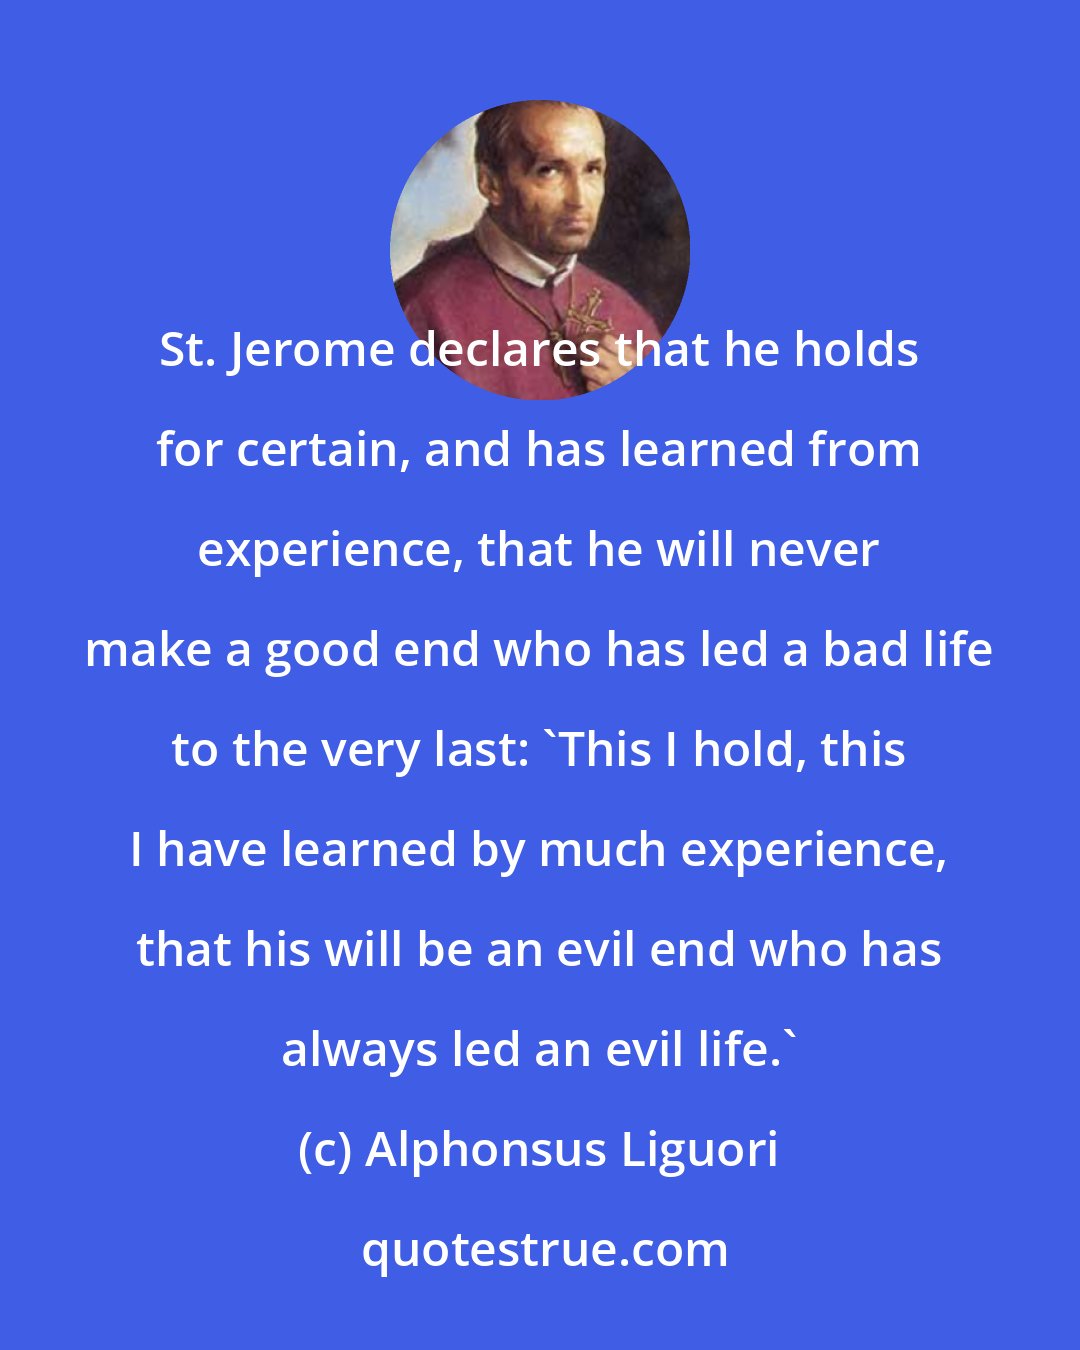 Alphonsus Liguori: St. Jerome declares that he holds for certain, and has learned from experience, that he will never make a good end who has led a bad life to the very last: 'This I hold, this I have learned by much experience, that his will be an evil end who has always led an evil life.'